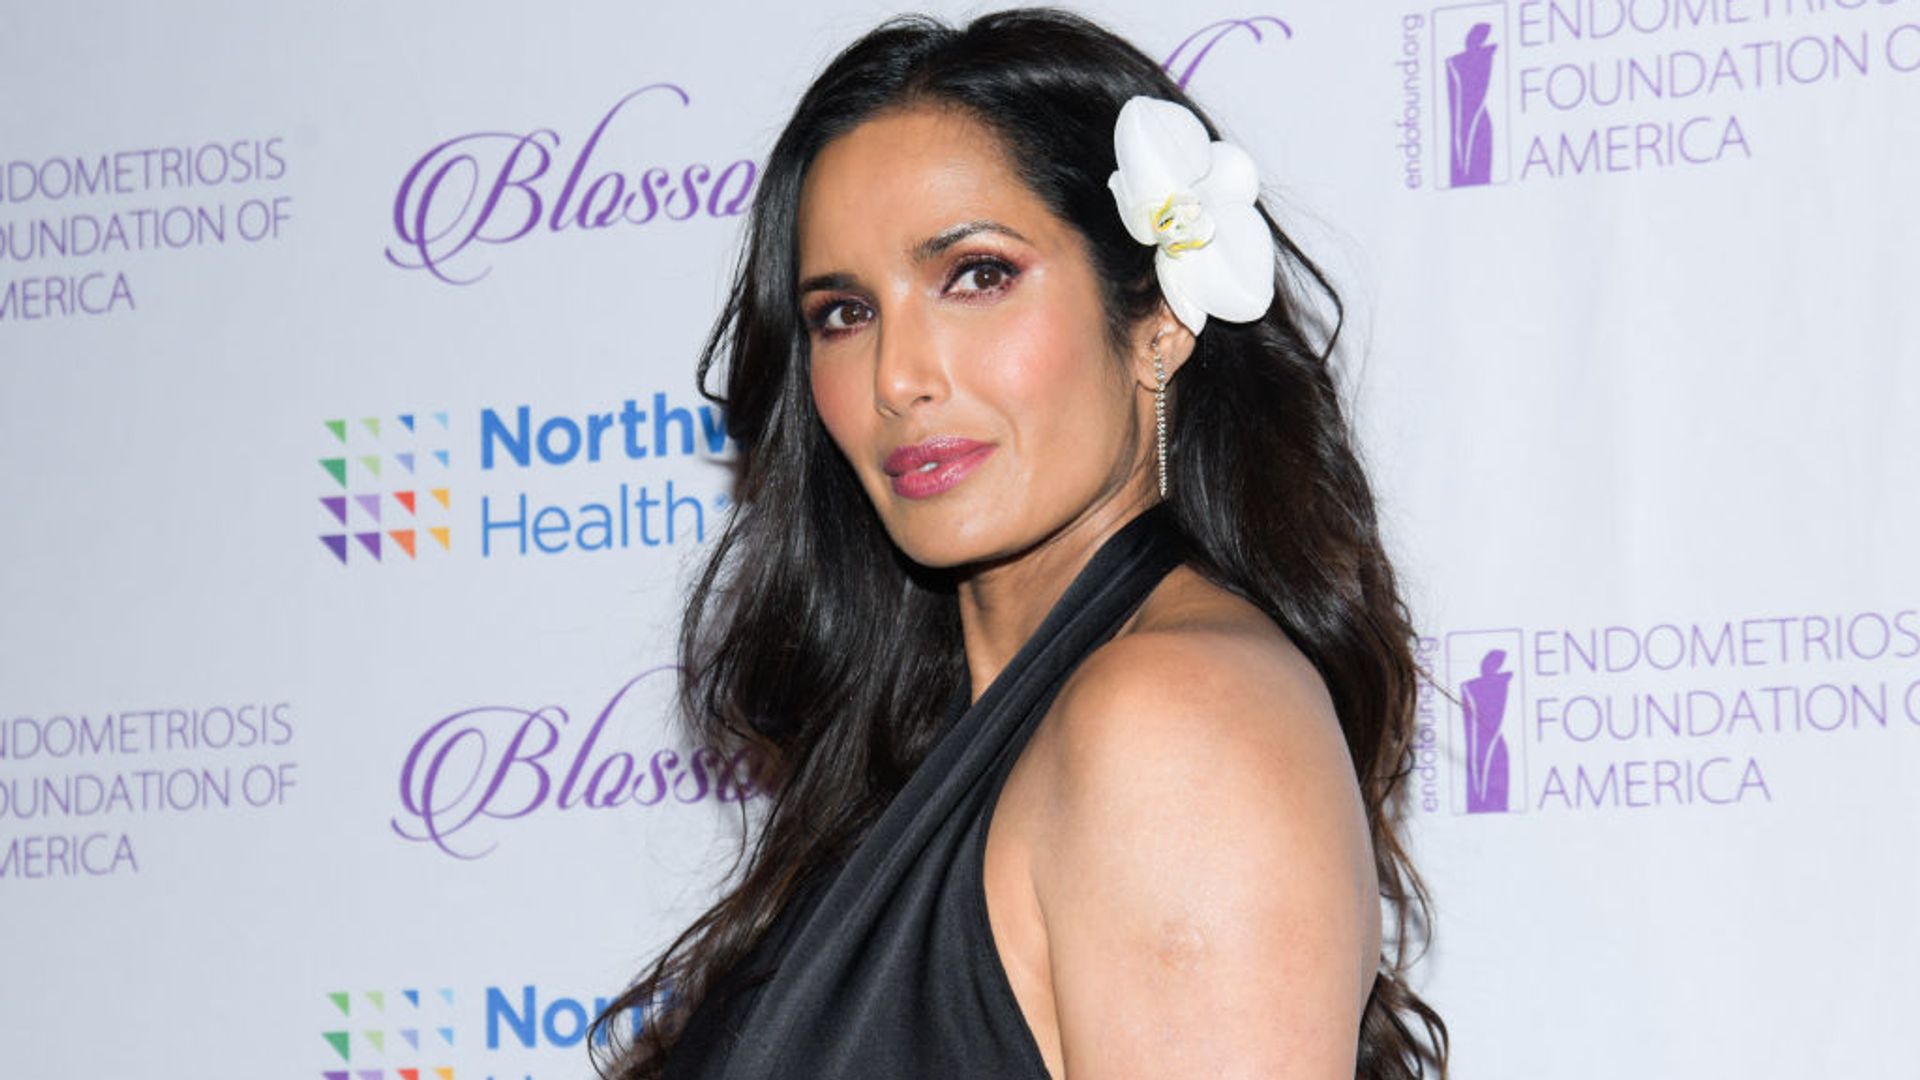 Padma Lakshmi at the Blossom Ball Endometriosis Foundation of America held at Cipriani 42nd Street on March 20, 2023. She is wearing a black satin halterneck dress and has a white orchid in her hair. 